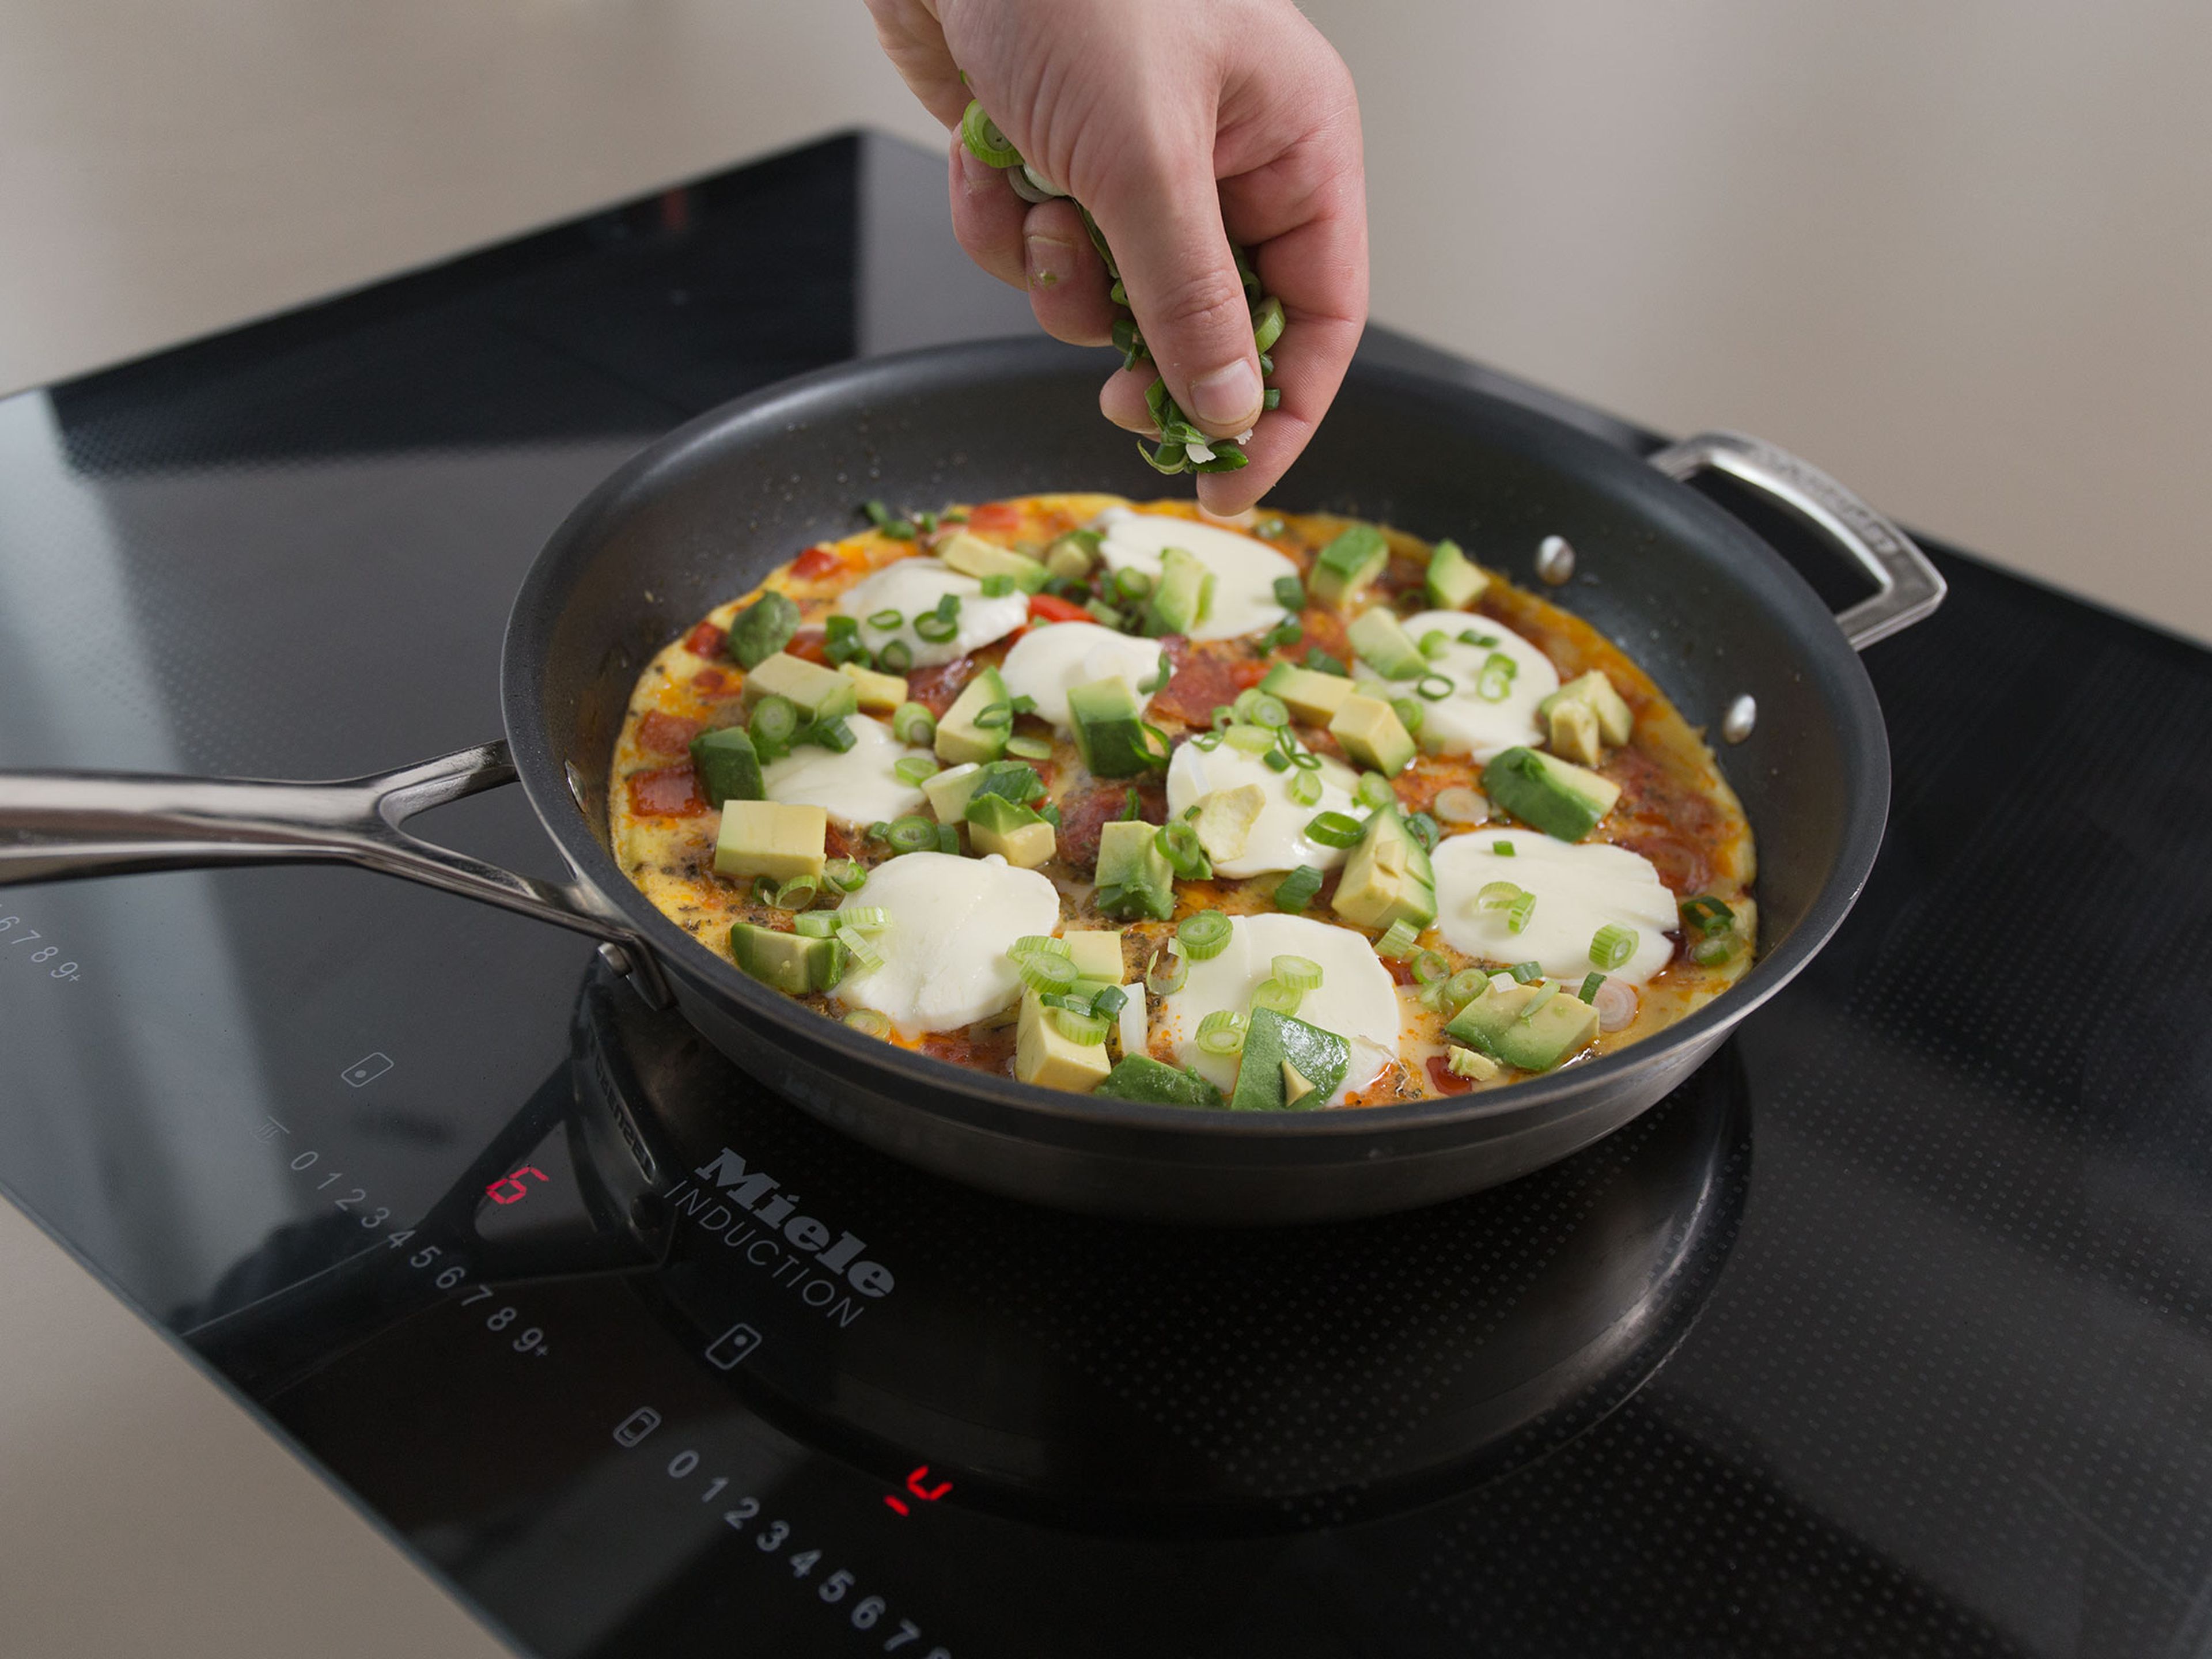 As soon as the omelette is half-cooked, spread the avocado, mozzarella, and spring onions over it. Place the lid back on and allow the omelet to cook for approx. 2 min. more. Serve and garnish with parsley. Enjoy!